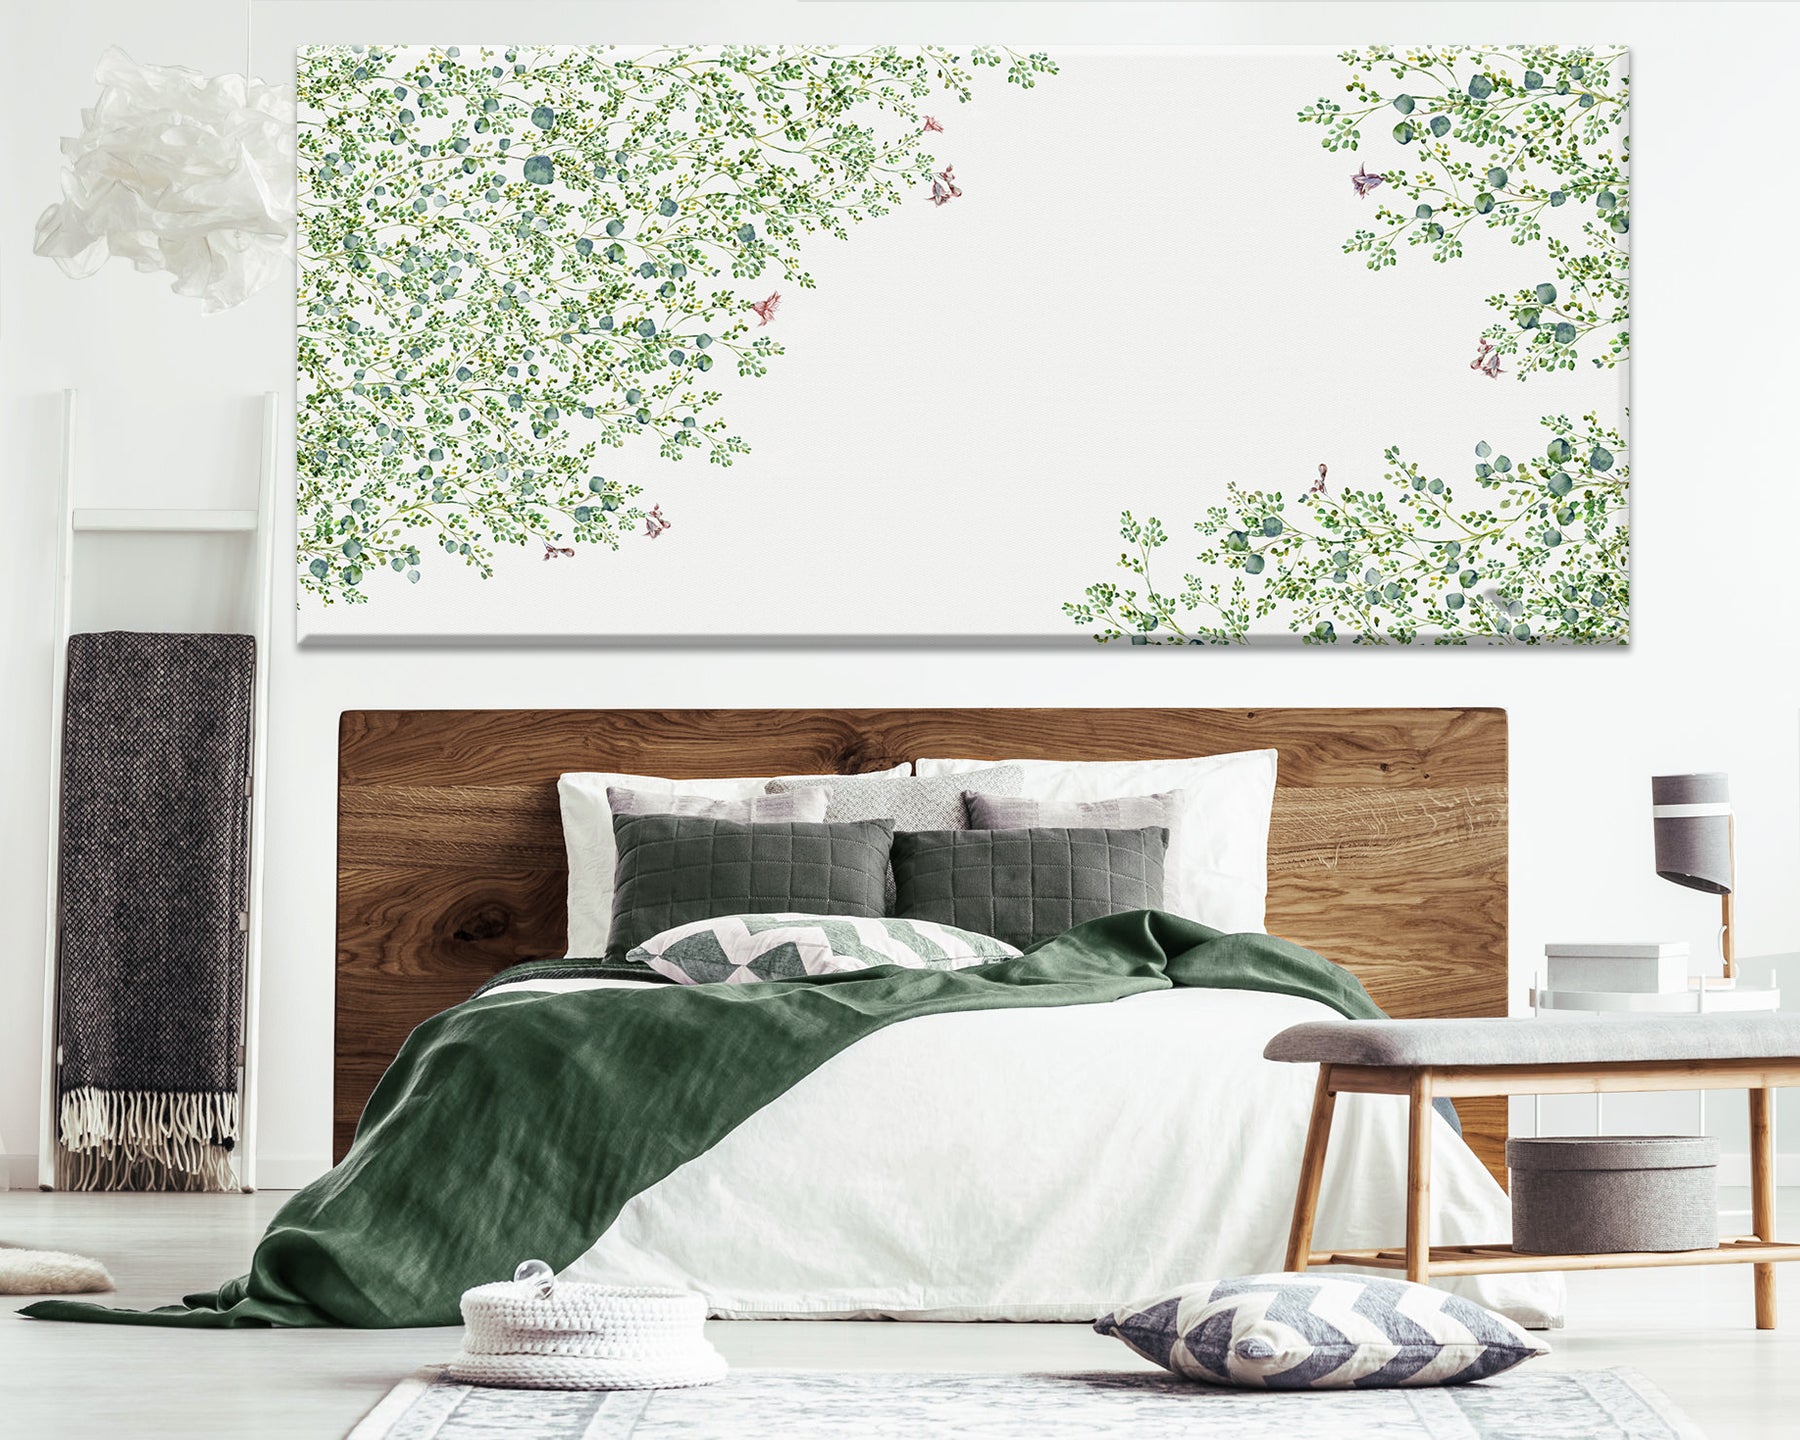 Canvas painting of a green abstract tree, hanged above bed 